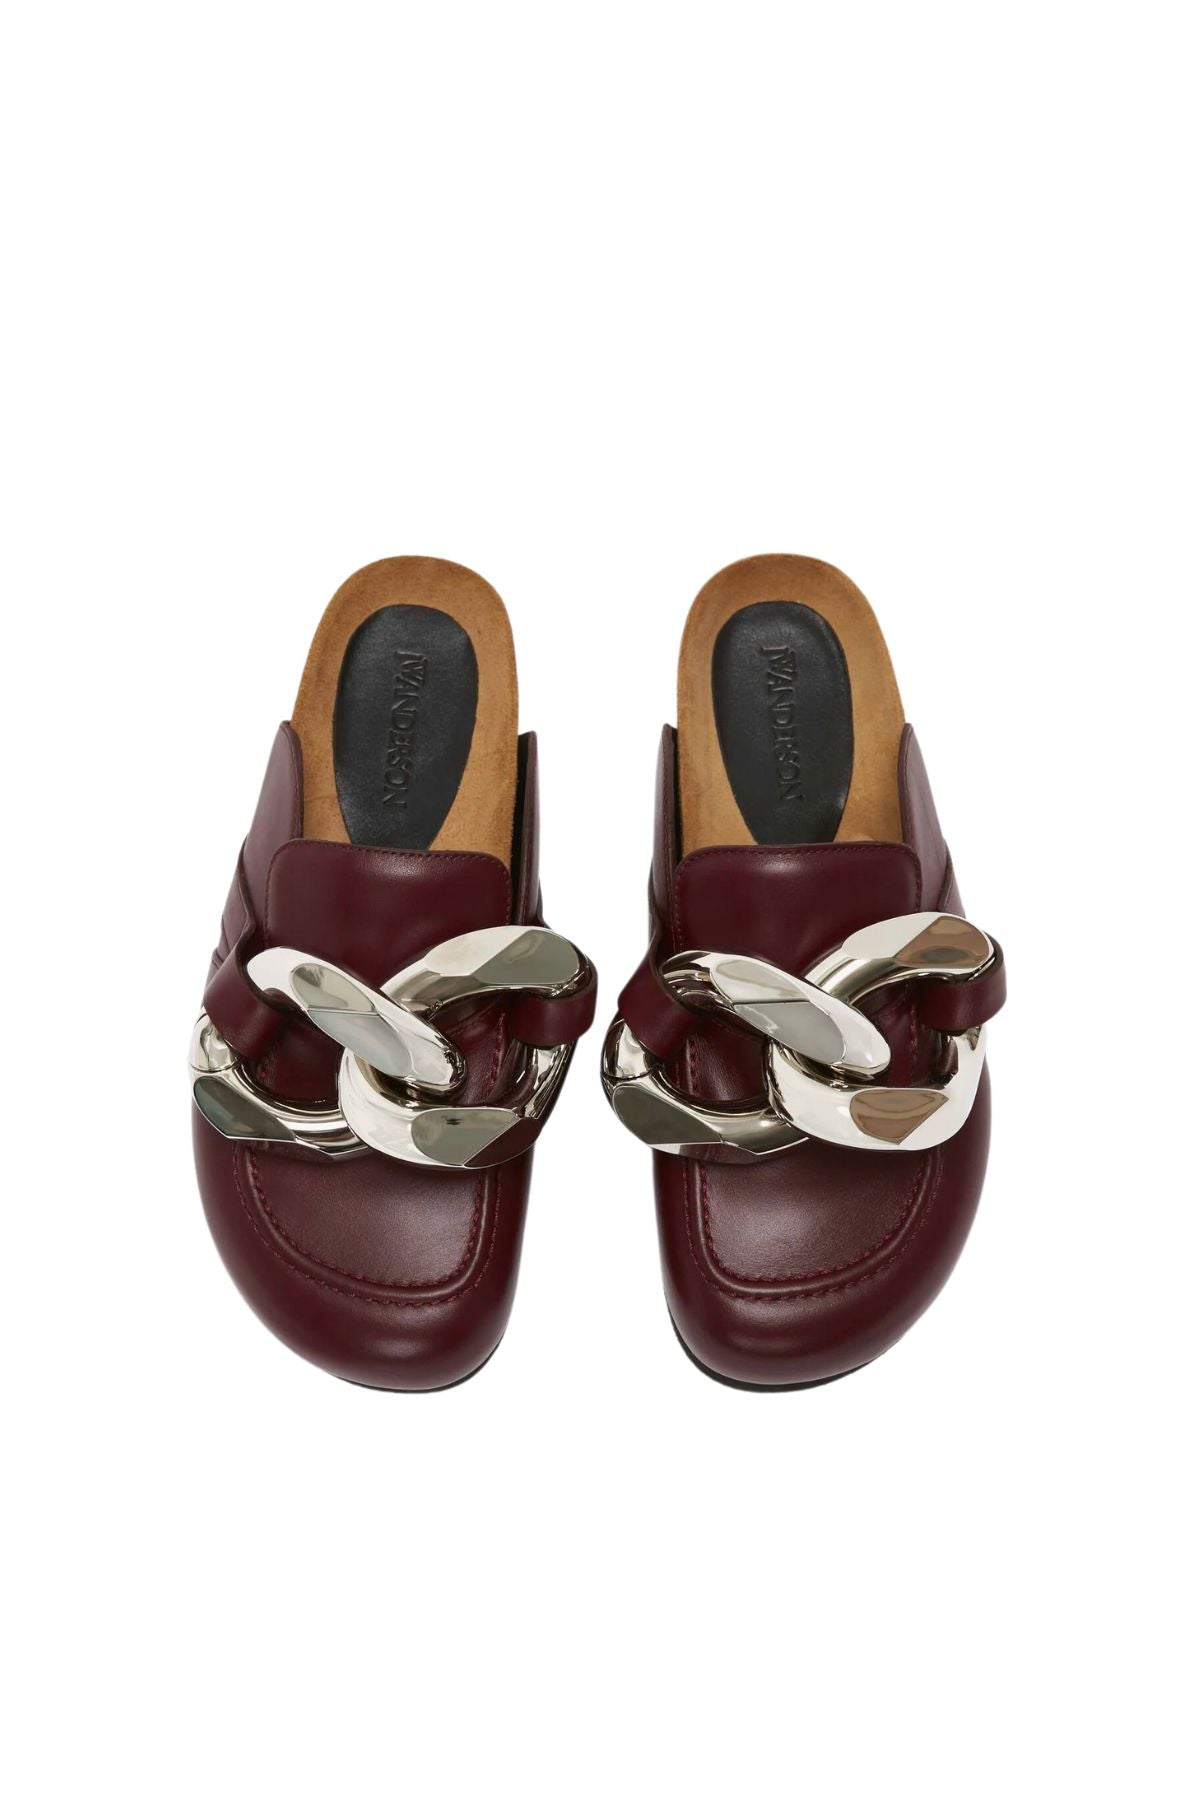 JW Anderson Chain Loafer - Burgundy/ Silver